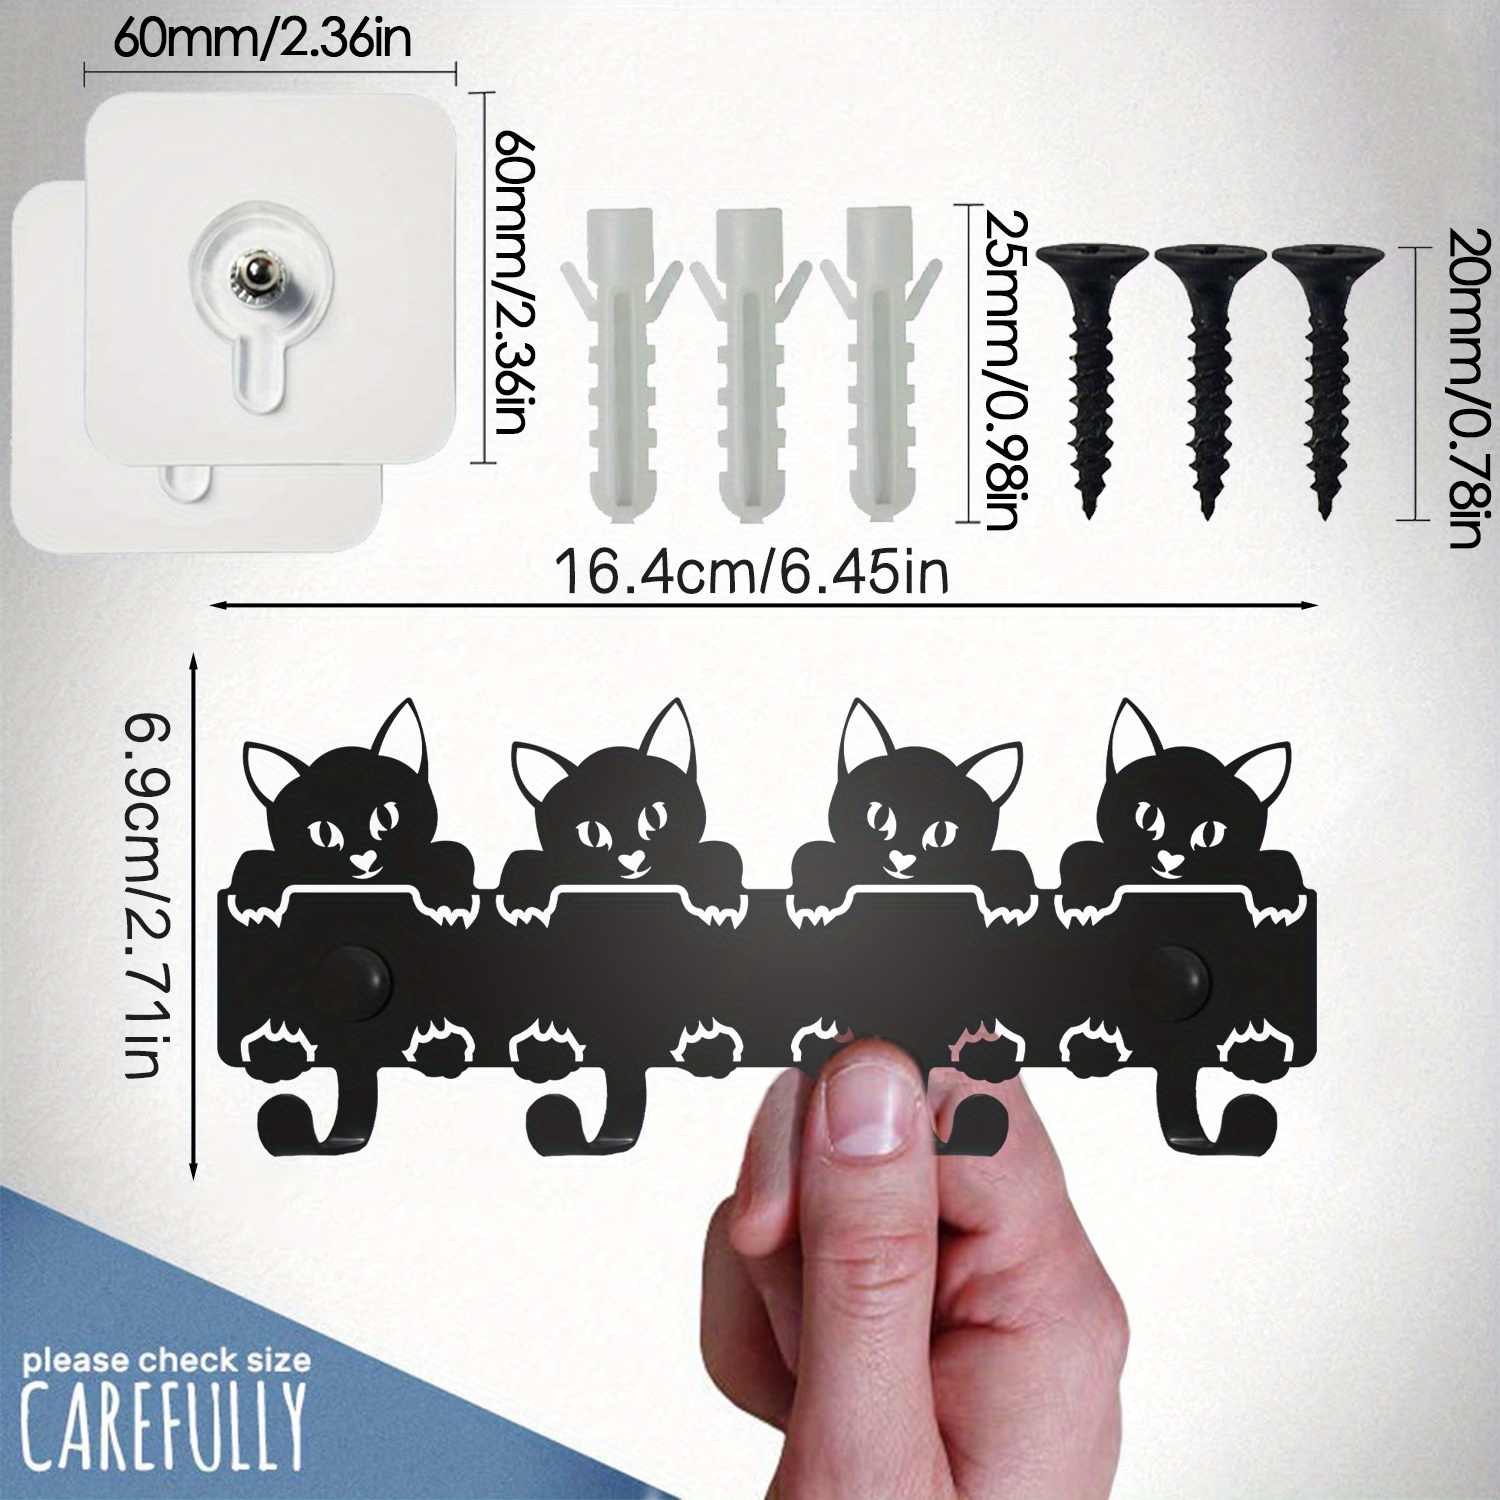 Pands Black Metal Cat Wall Hooks with 4 Hangers - Decorative Key Holder and Adhesive Mount, 9.45 x 6.3 INCHES.